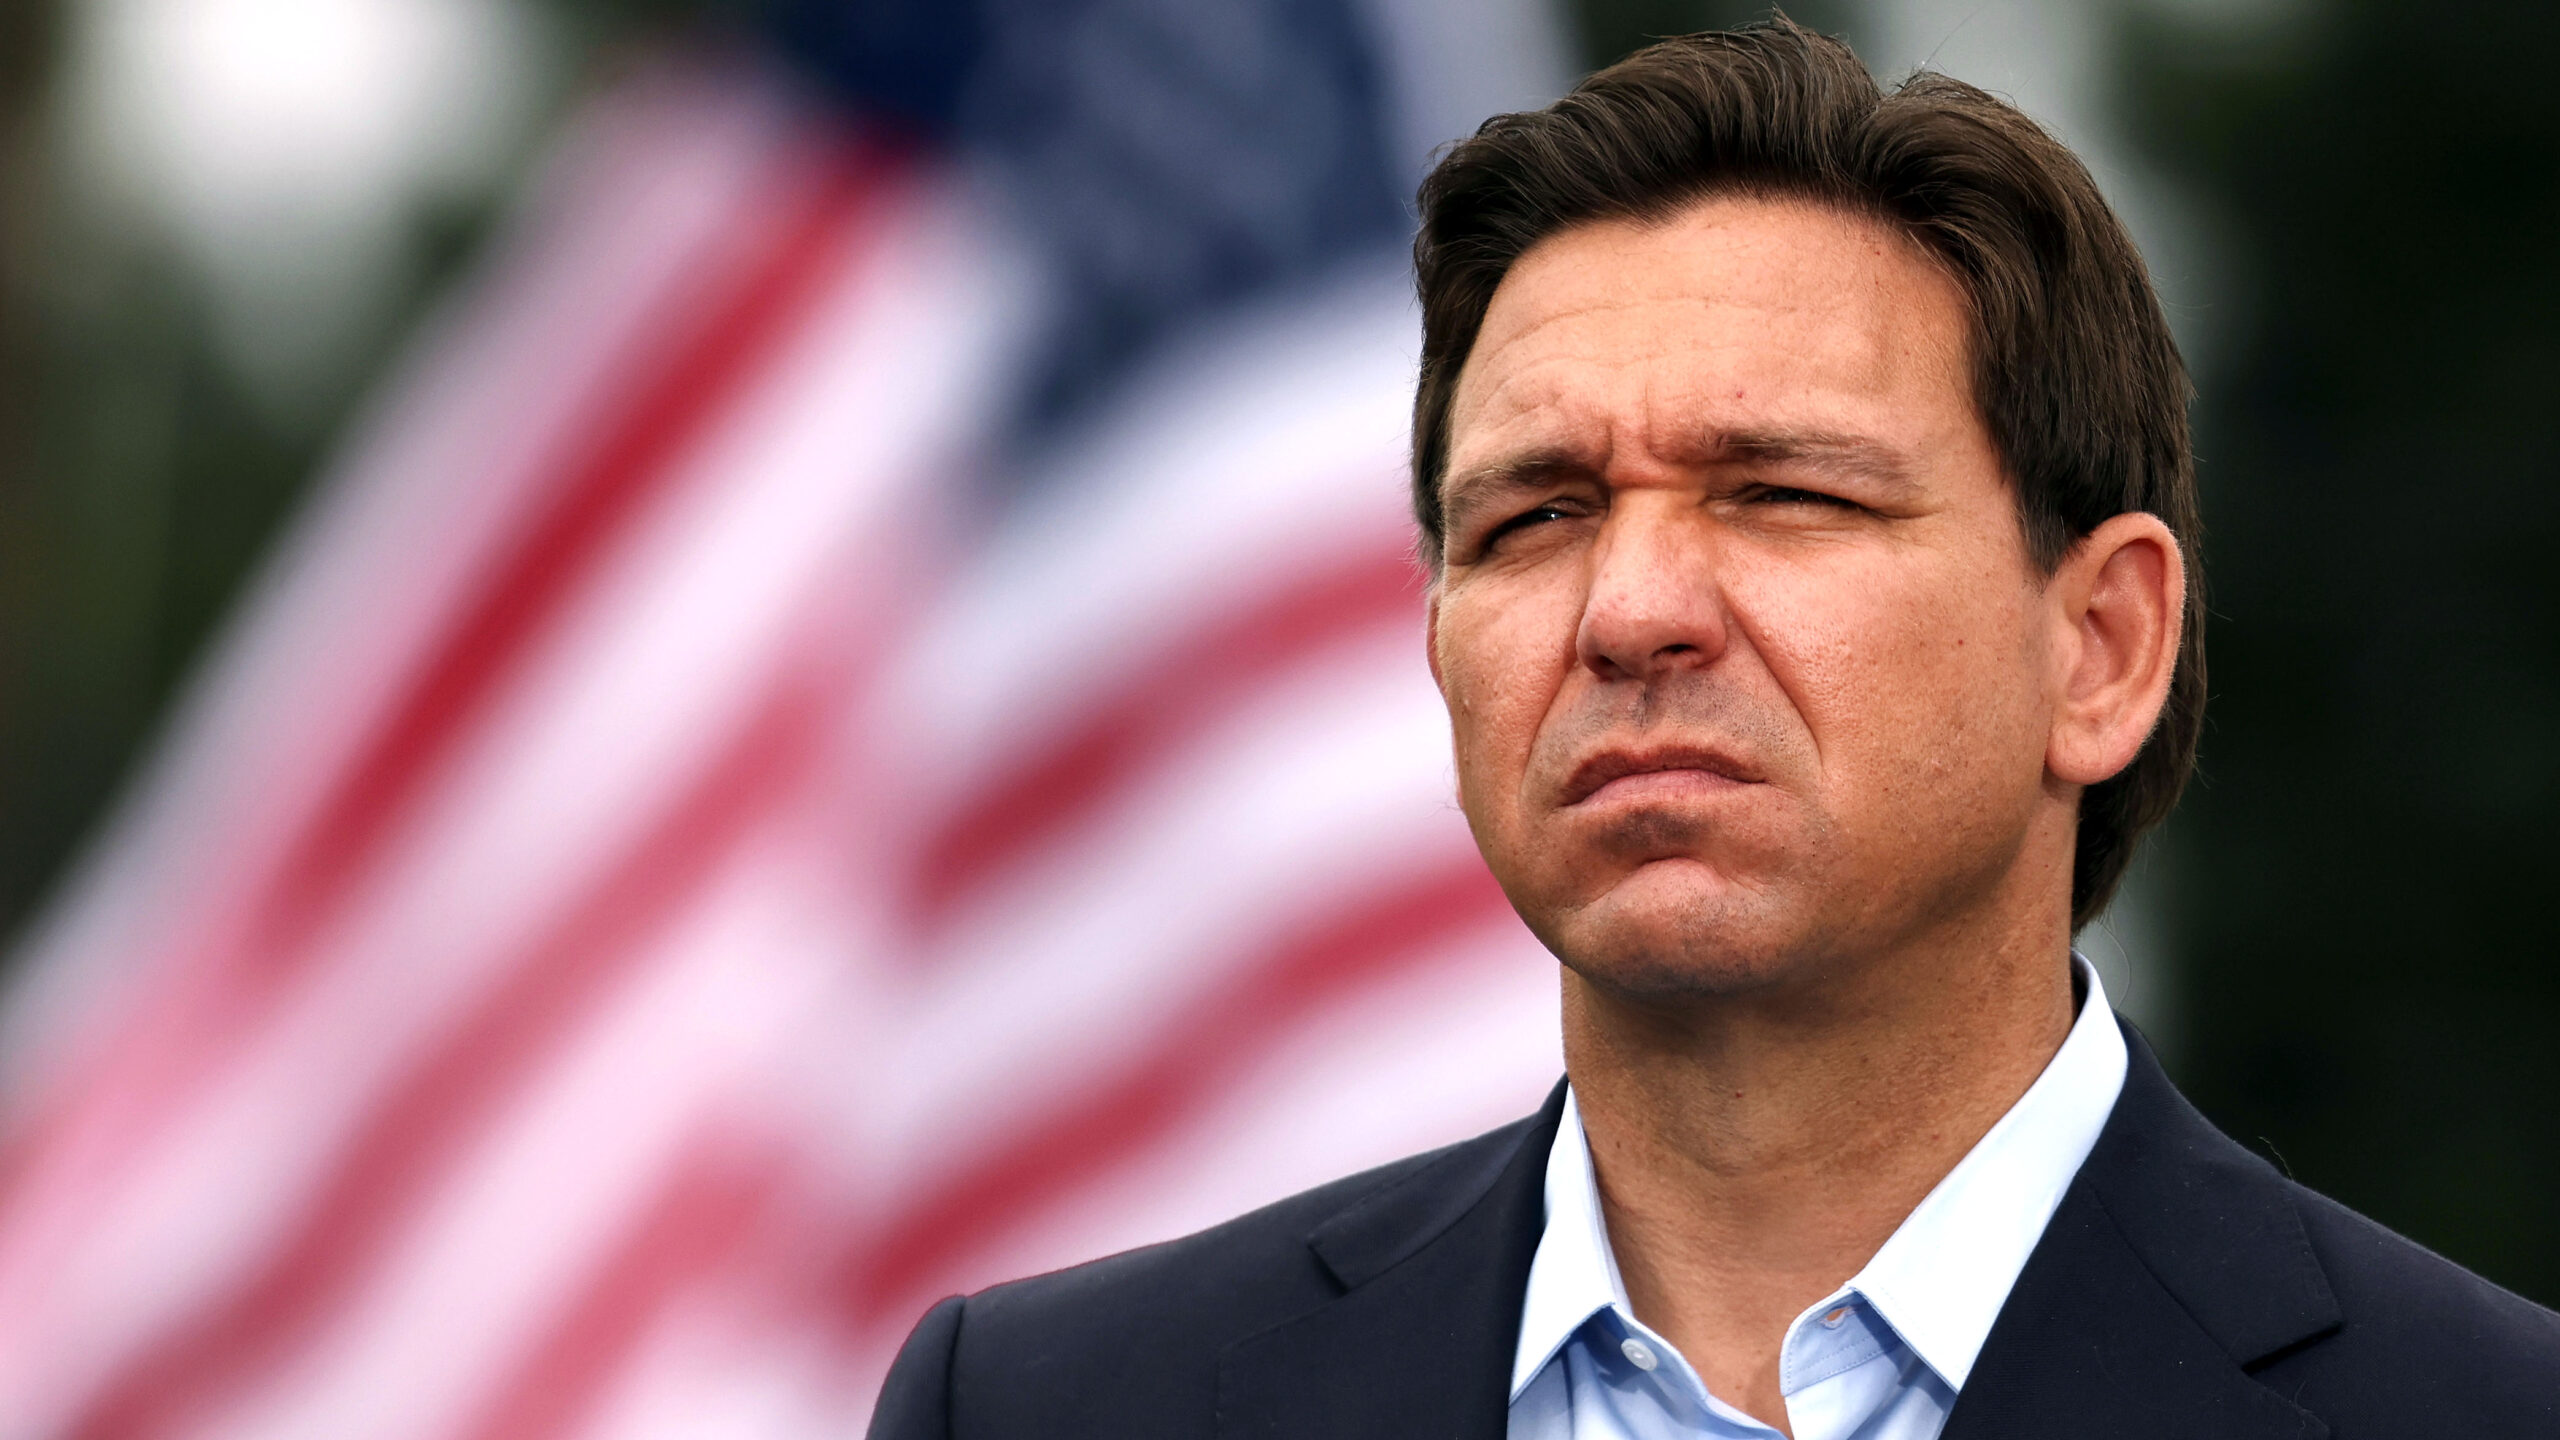 DeSantis accuses Biden of intentionally stalling flying vehicle plan to favor France.